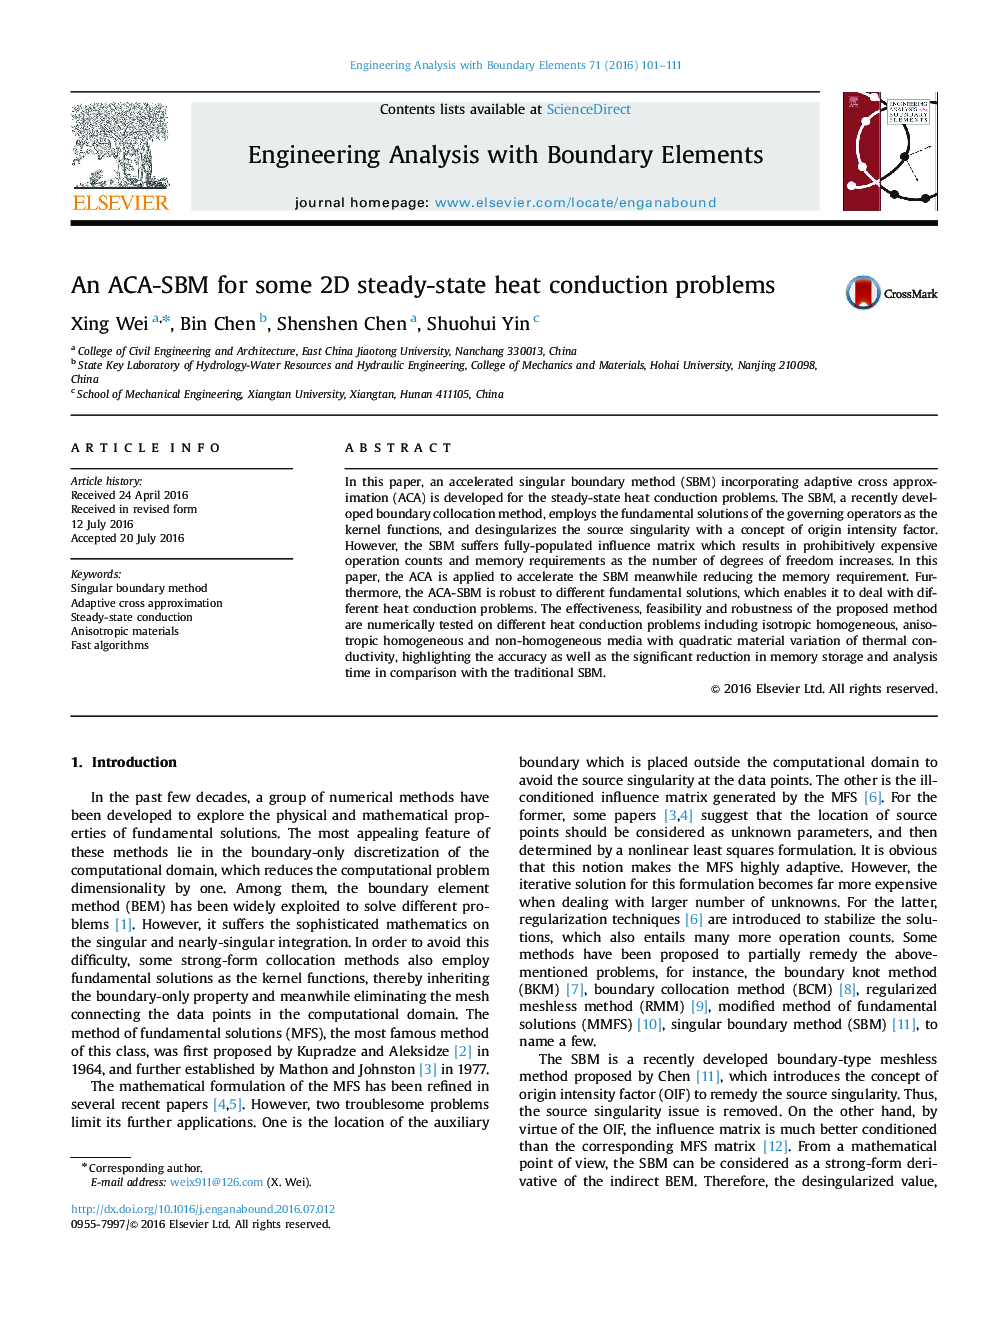 An ACA-SBM for some 2D steady-state heat conduction problems